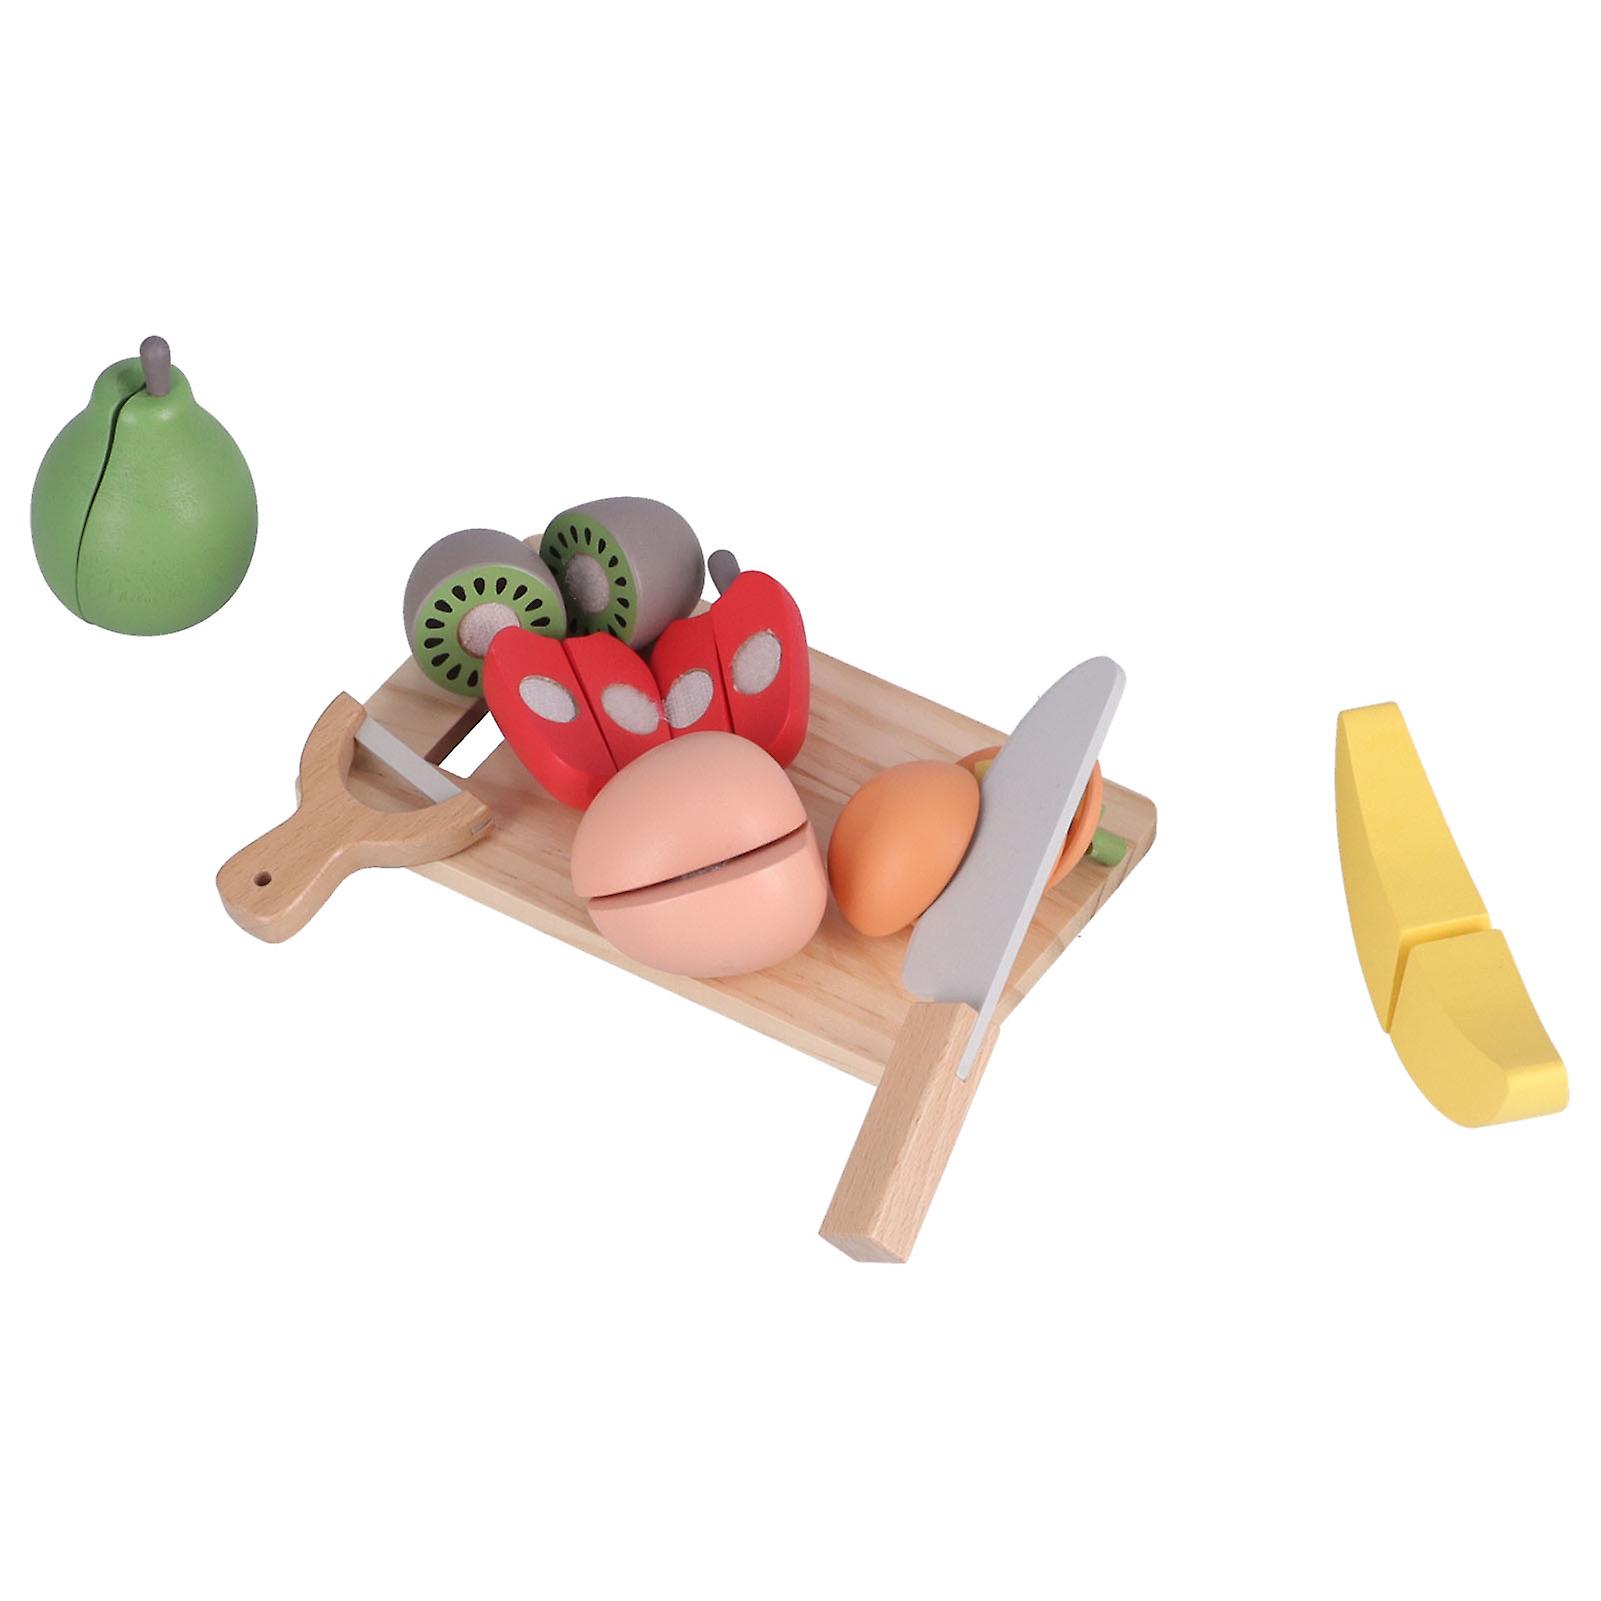 Kids Kitchen Cutting Play Food Toy Wooden Pretend Play Fruits Set For Boys Girls Birthday Giftohye Simulation Wooden Box Fruit Combination